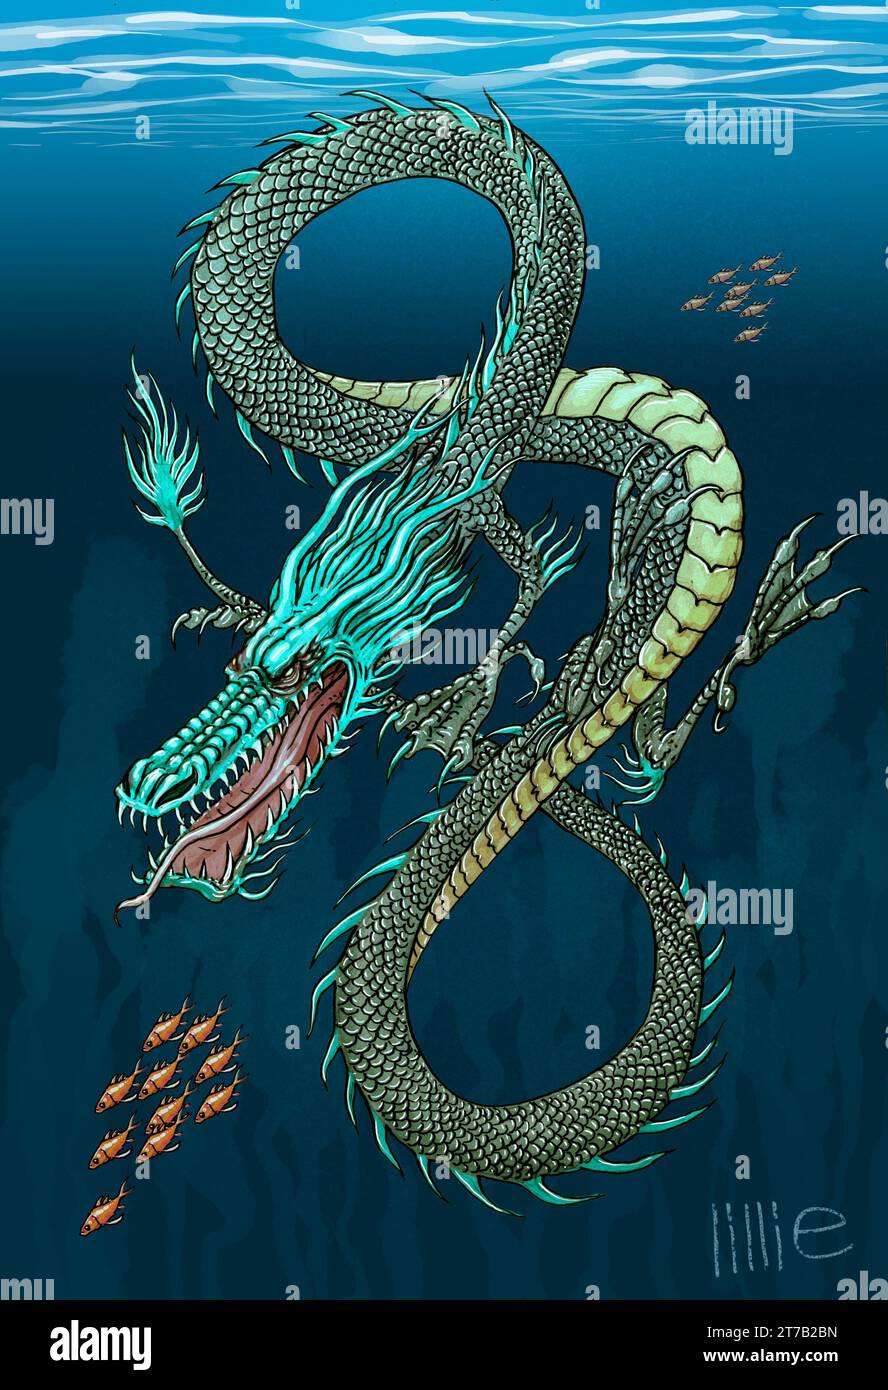 Art, mizuchi (大虬, 蛟龍, 蛟, 美都知), a type of Japanese dragon or legendary serpent-like creature, connected to water, described by some as a water deity. Stock Photo